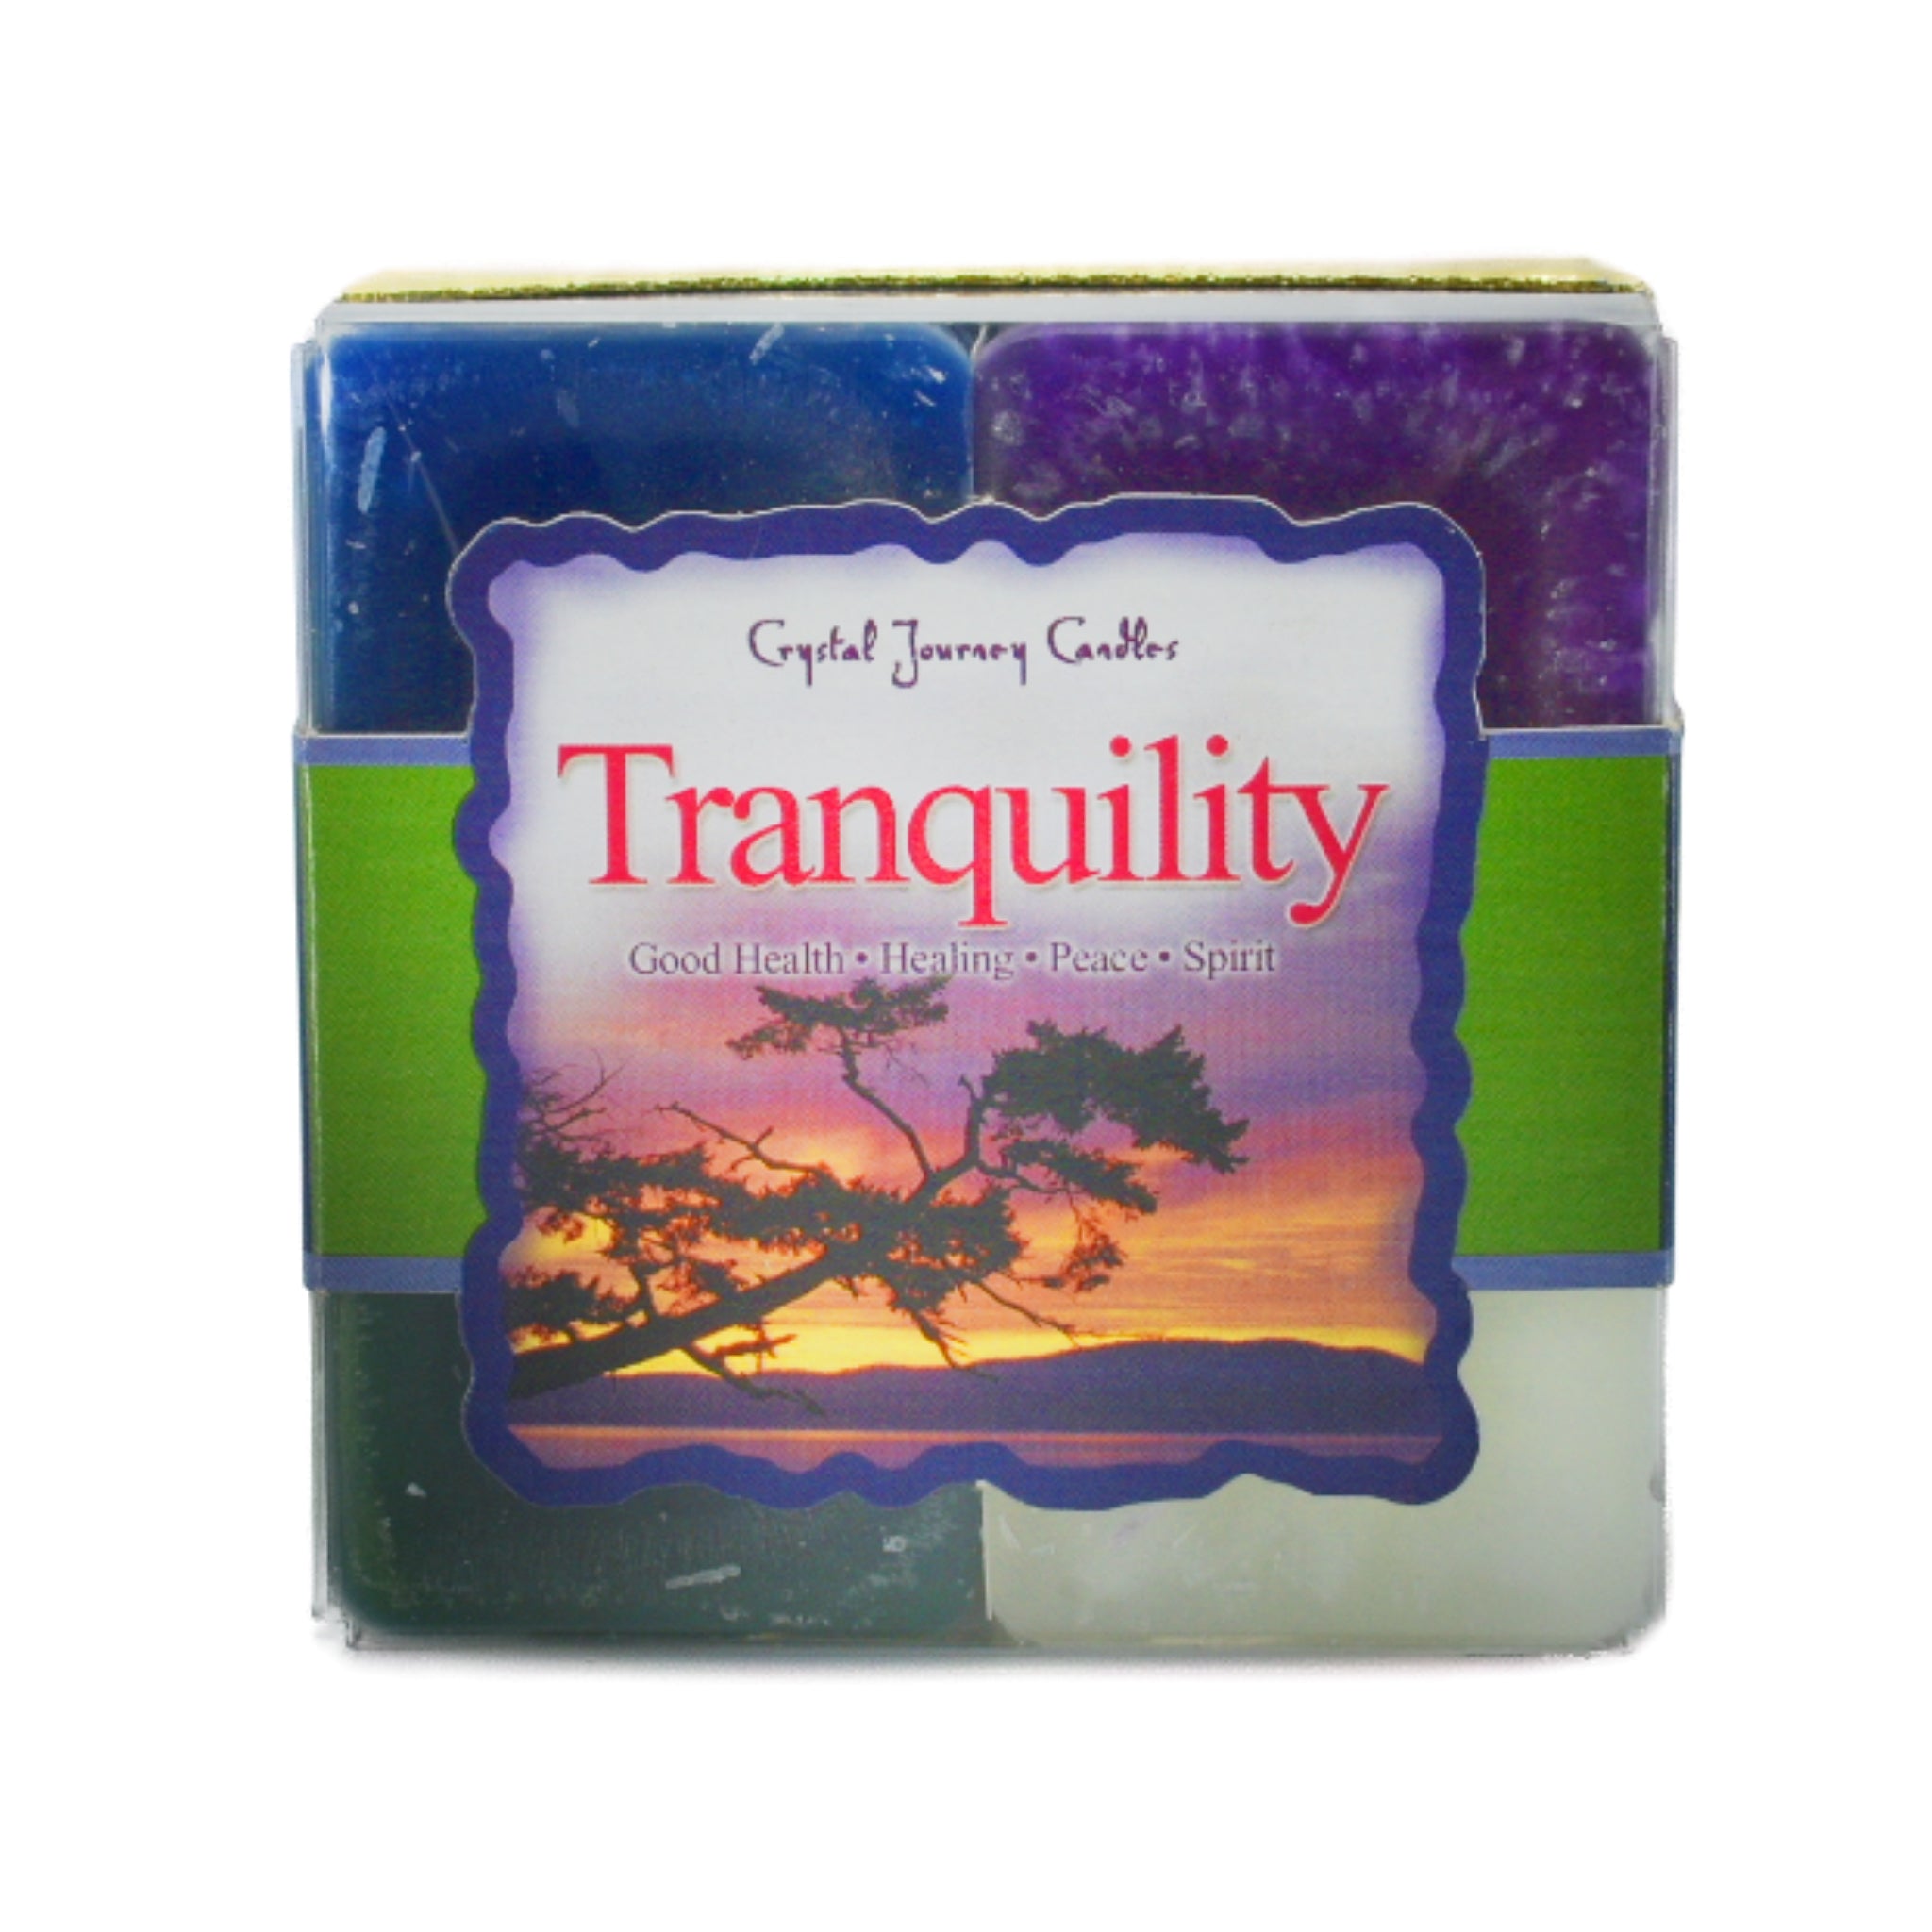 Tranquility Square Pack Candle.  The scented candles are: Spirit is white, Good Health is blue, Healing is purple and Peace is green.